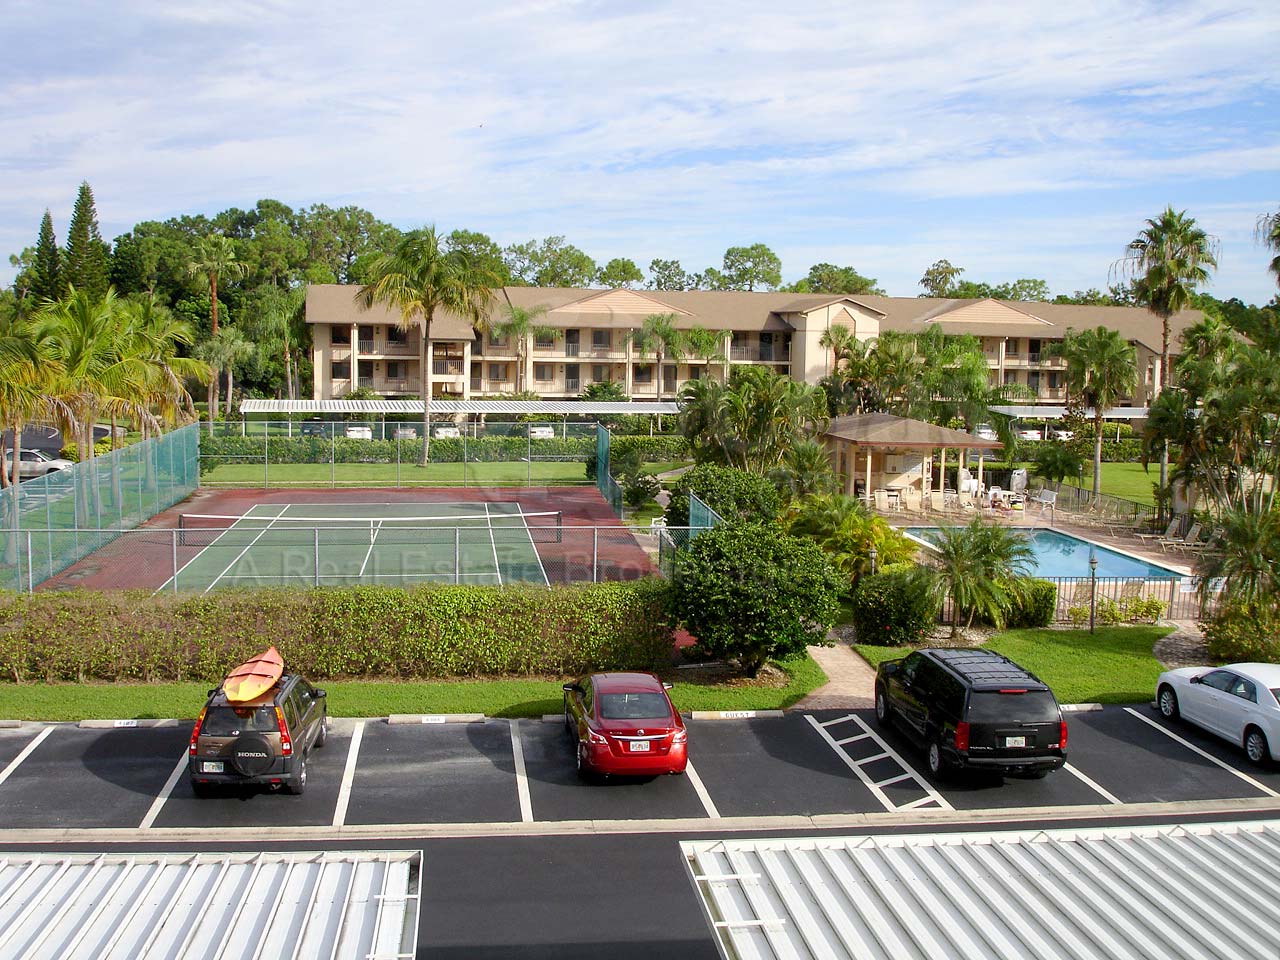 Country Haven Community and Tennis Courts